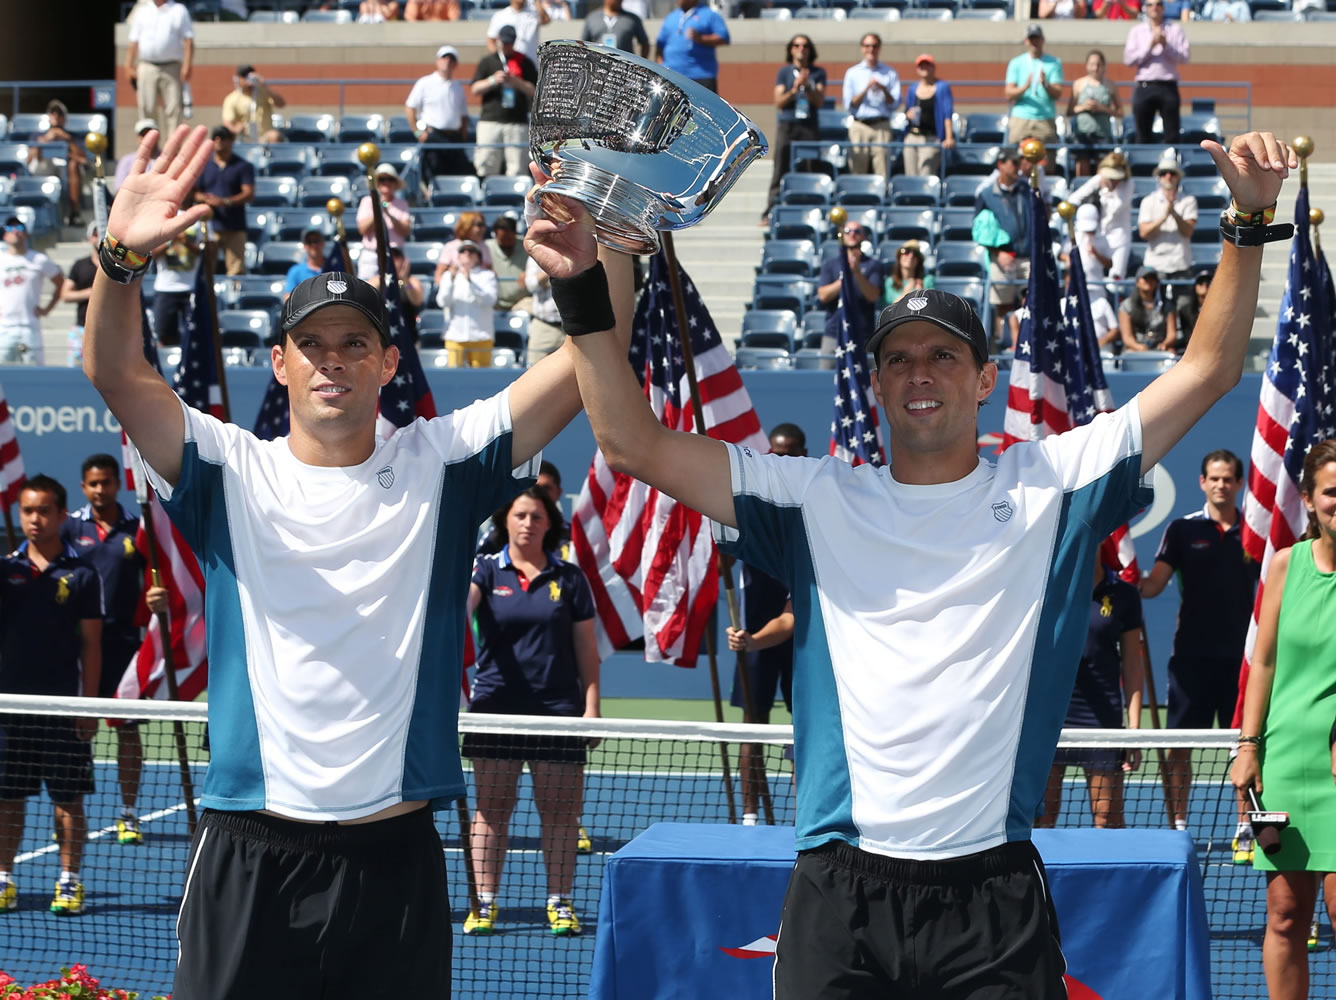 Bob, left, and Mike Bryan raise the men's doubles championship trophy after defeating Marc Lopez and Marcel Granollers, of Spain, in the doubles championship match of the 2014 U.S. Open tennis tournament, Sunday, Sept. 7, 2014, in New York. The win gave the Bryan's their 100th tournament title.